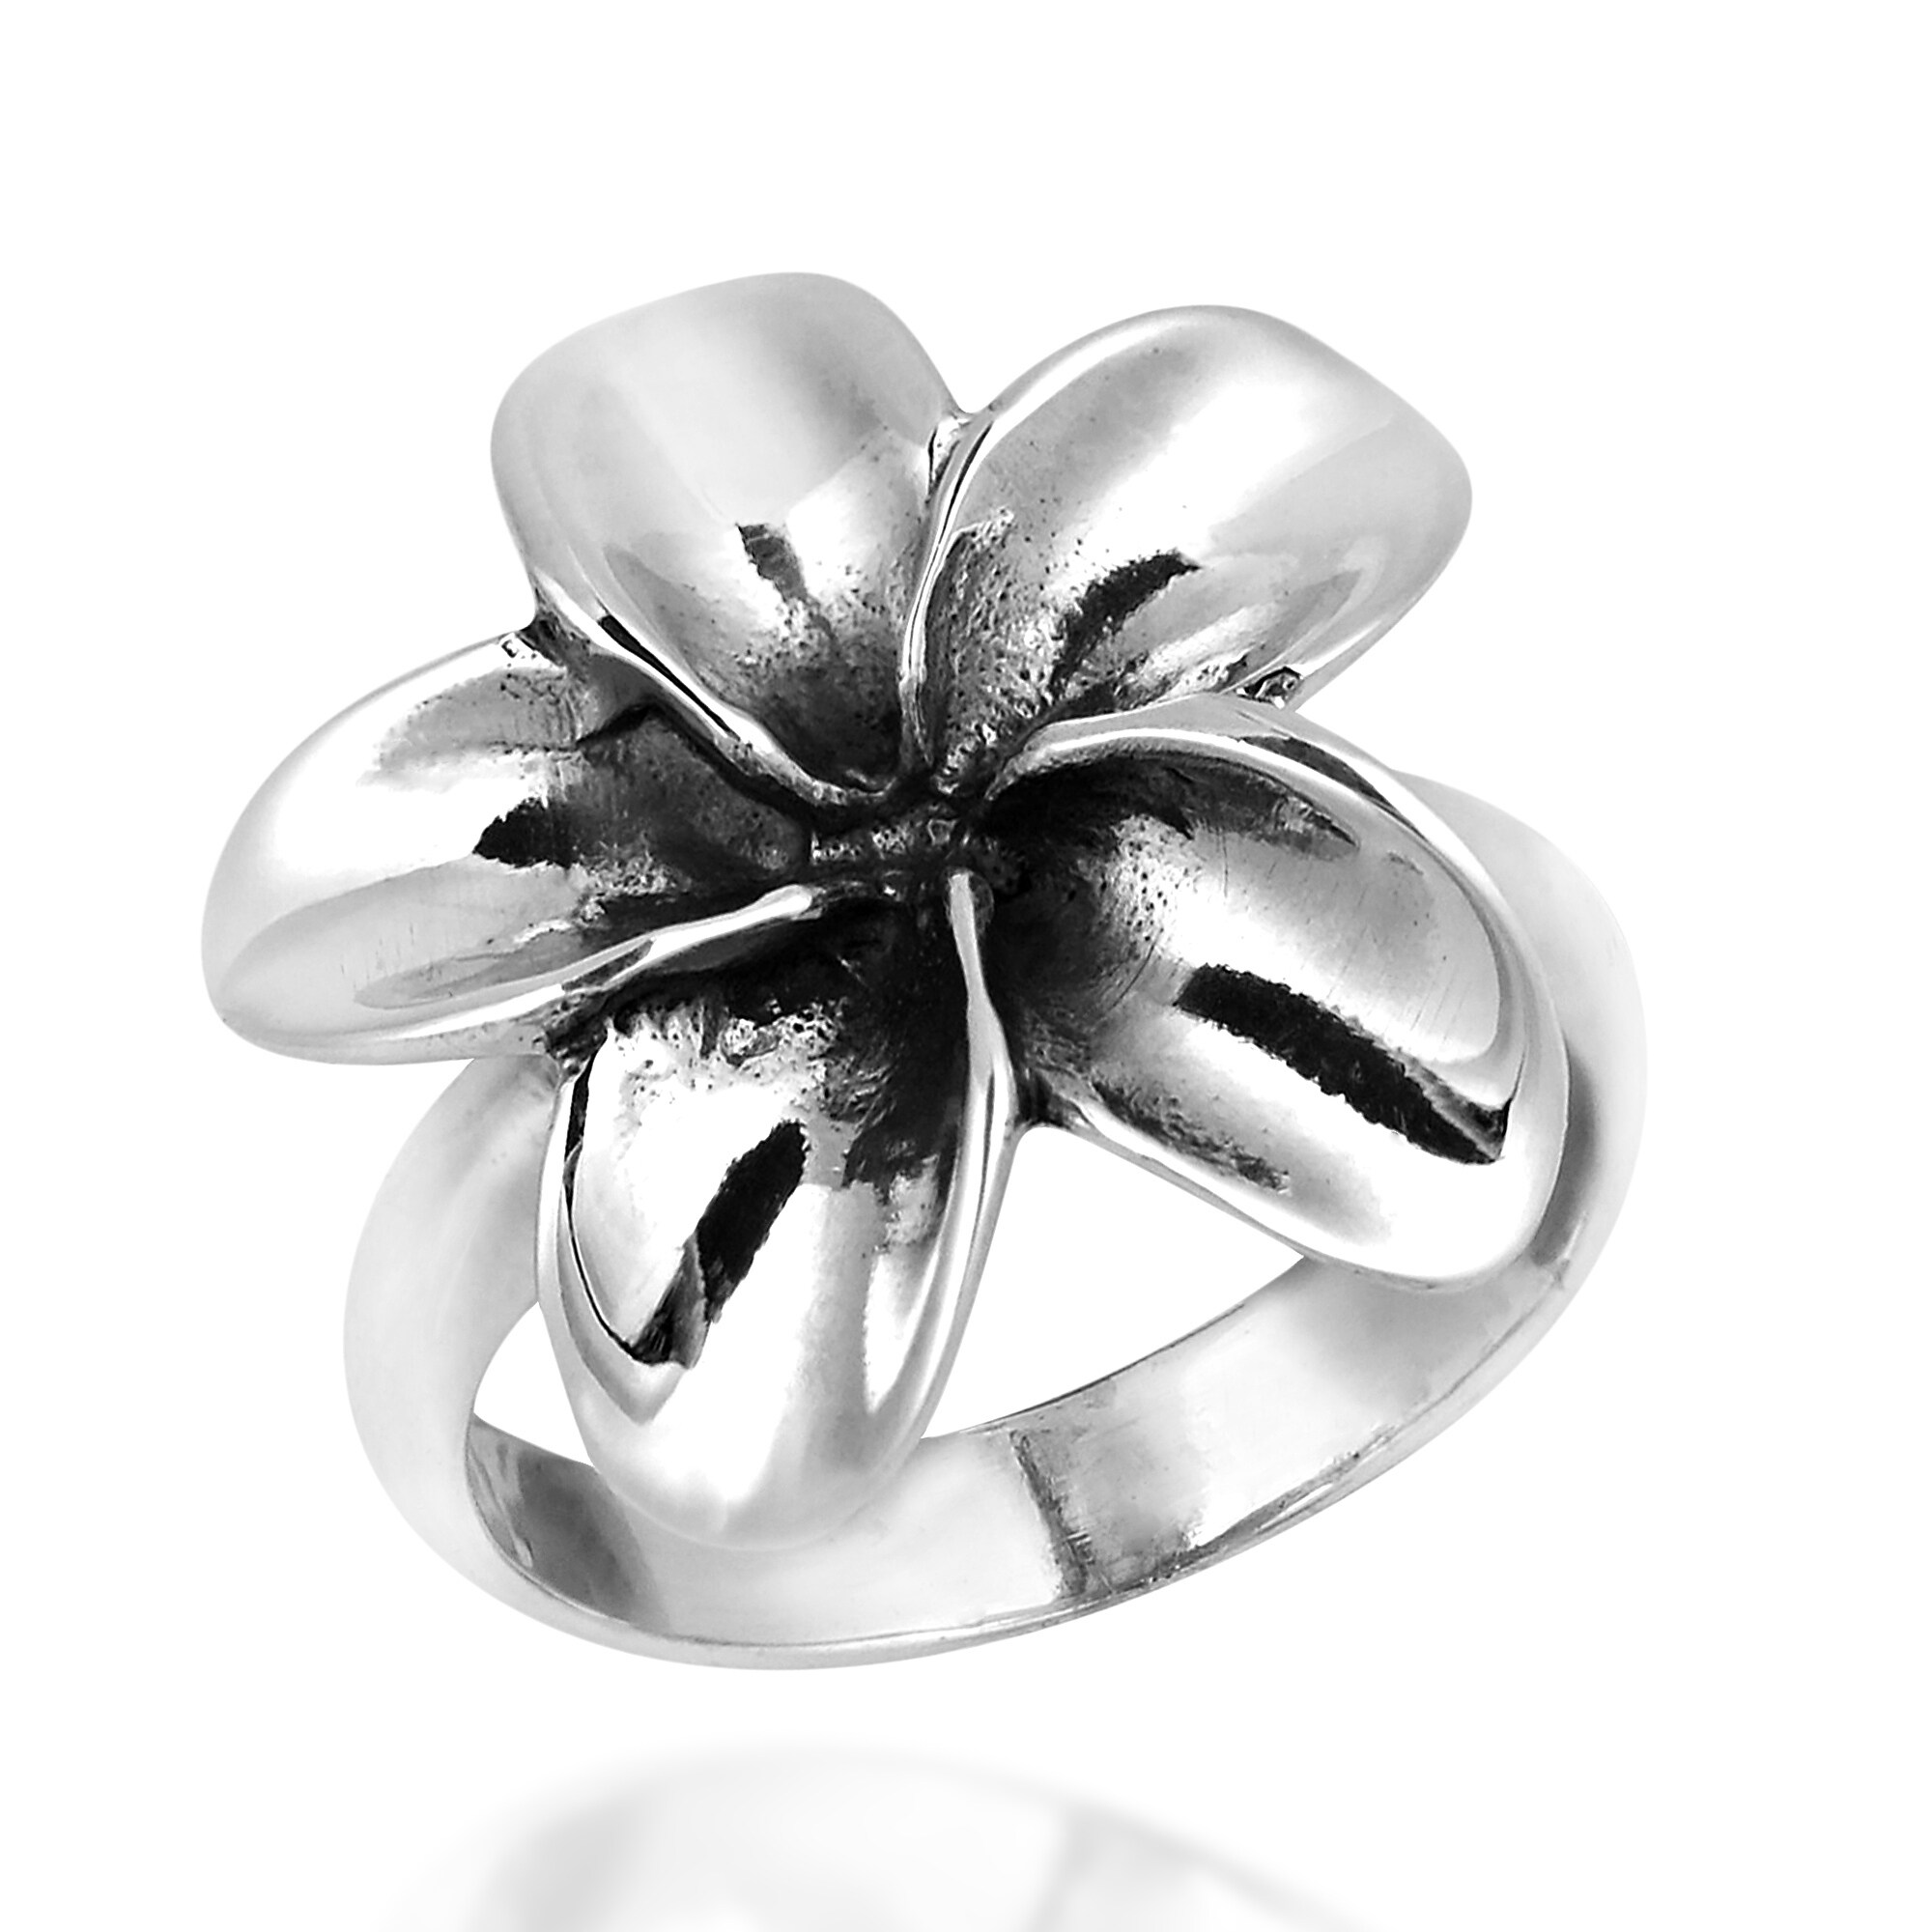 STUNNING STERLING SILVER HAWAIIAN PLUMERIA RING size 10  style# r0539 